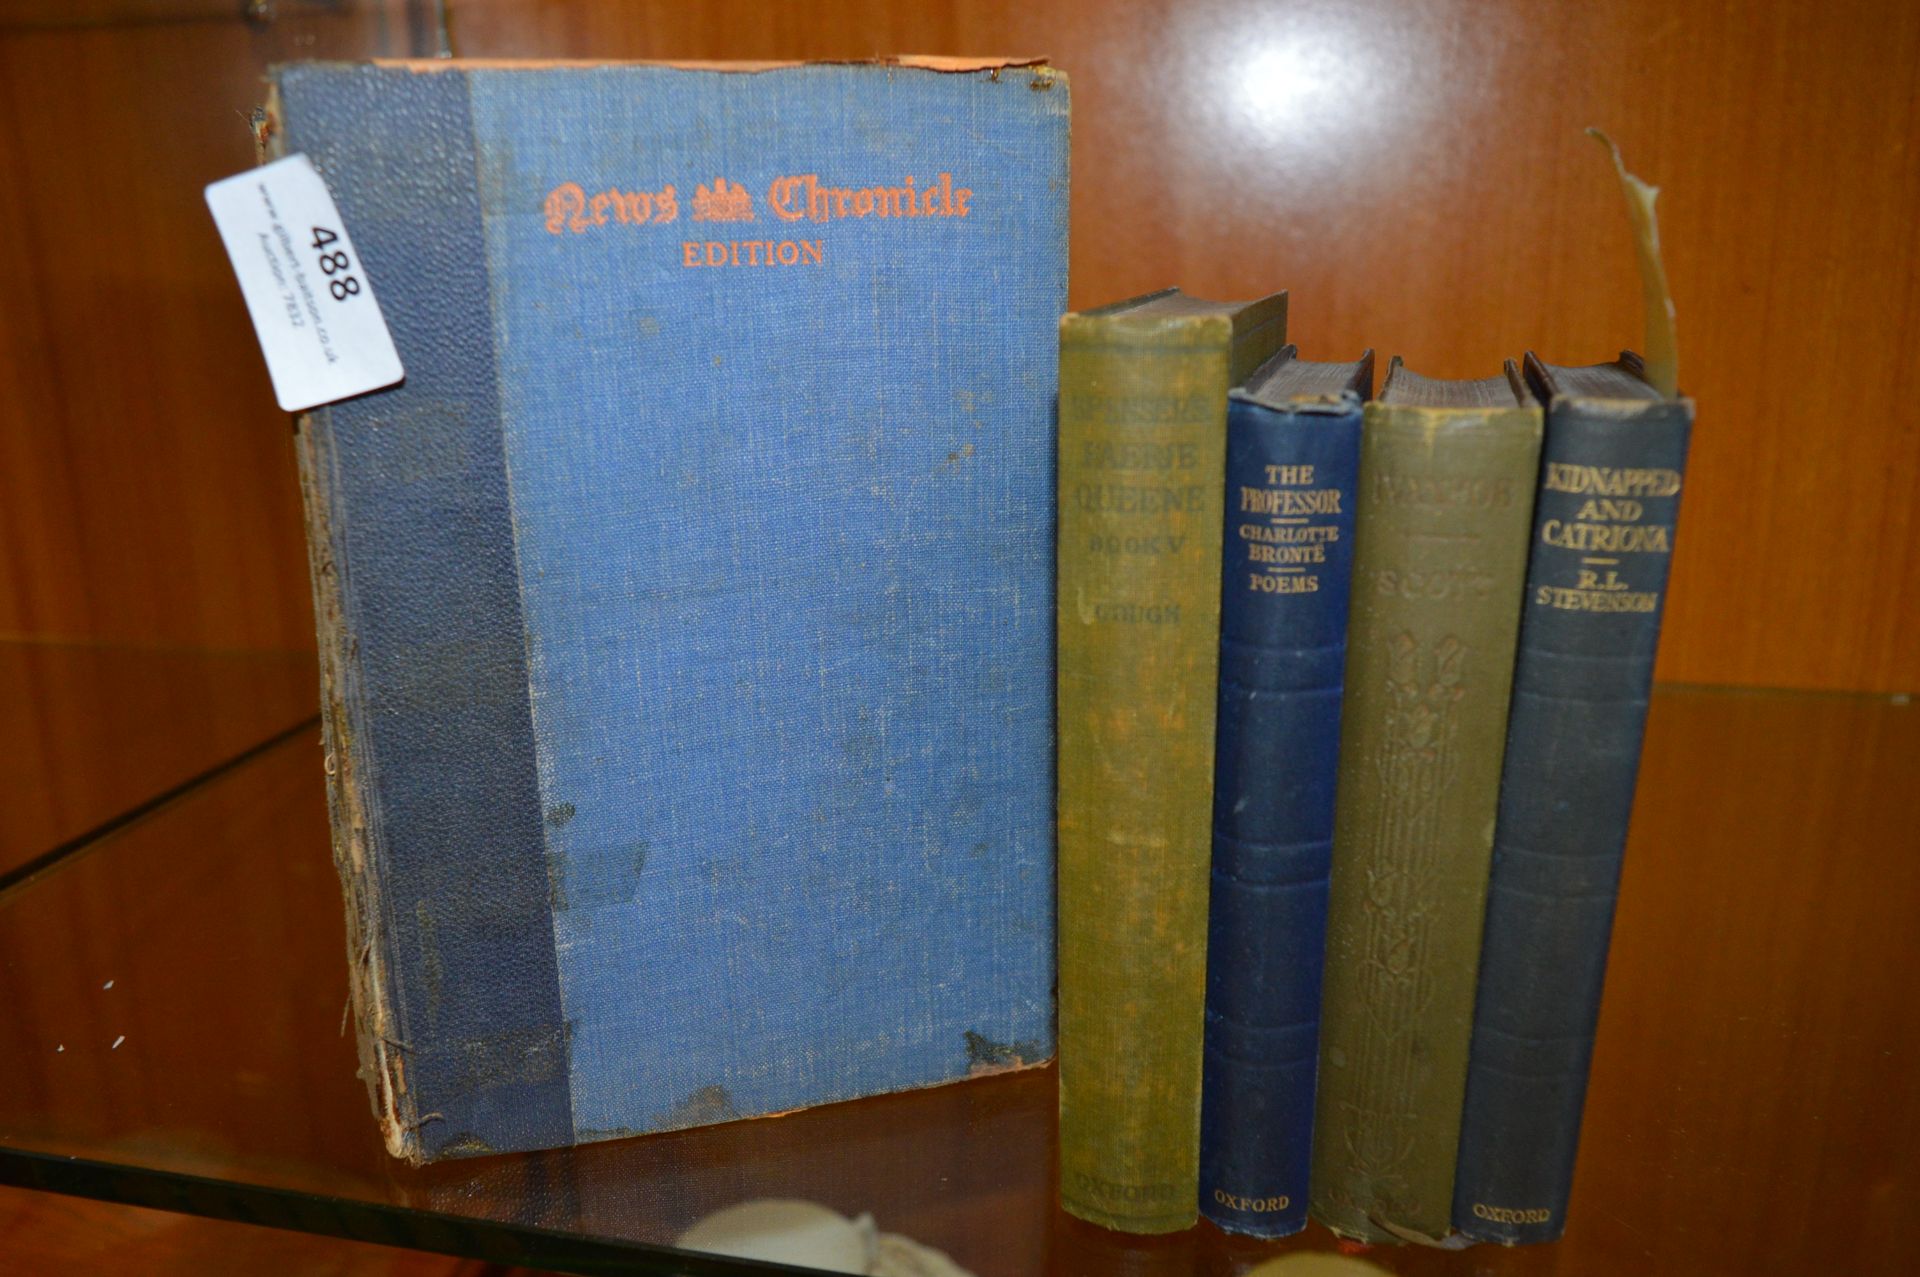 Vintage Books, News Chronicle and Poems